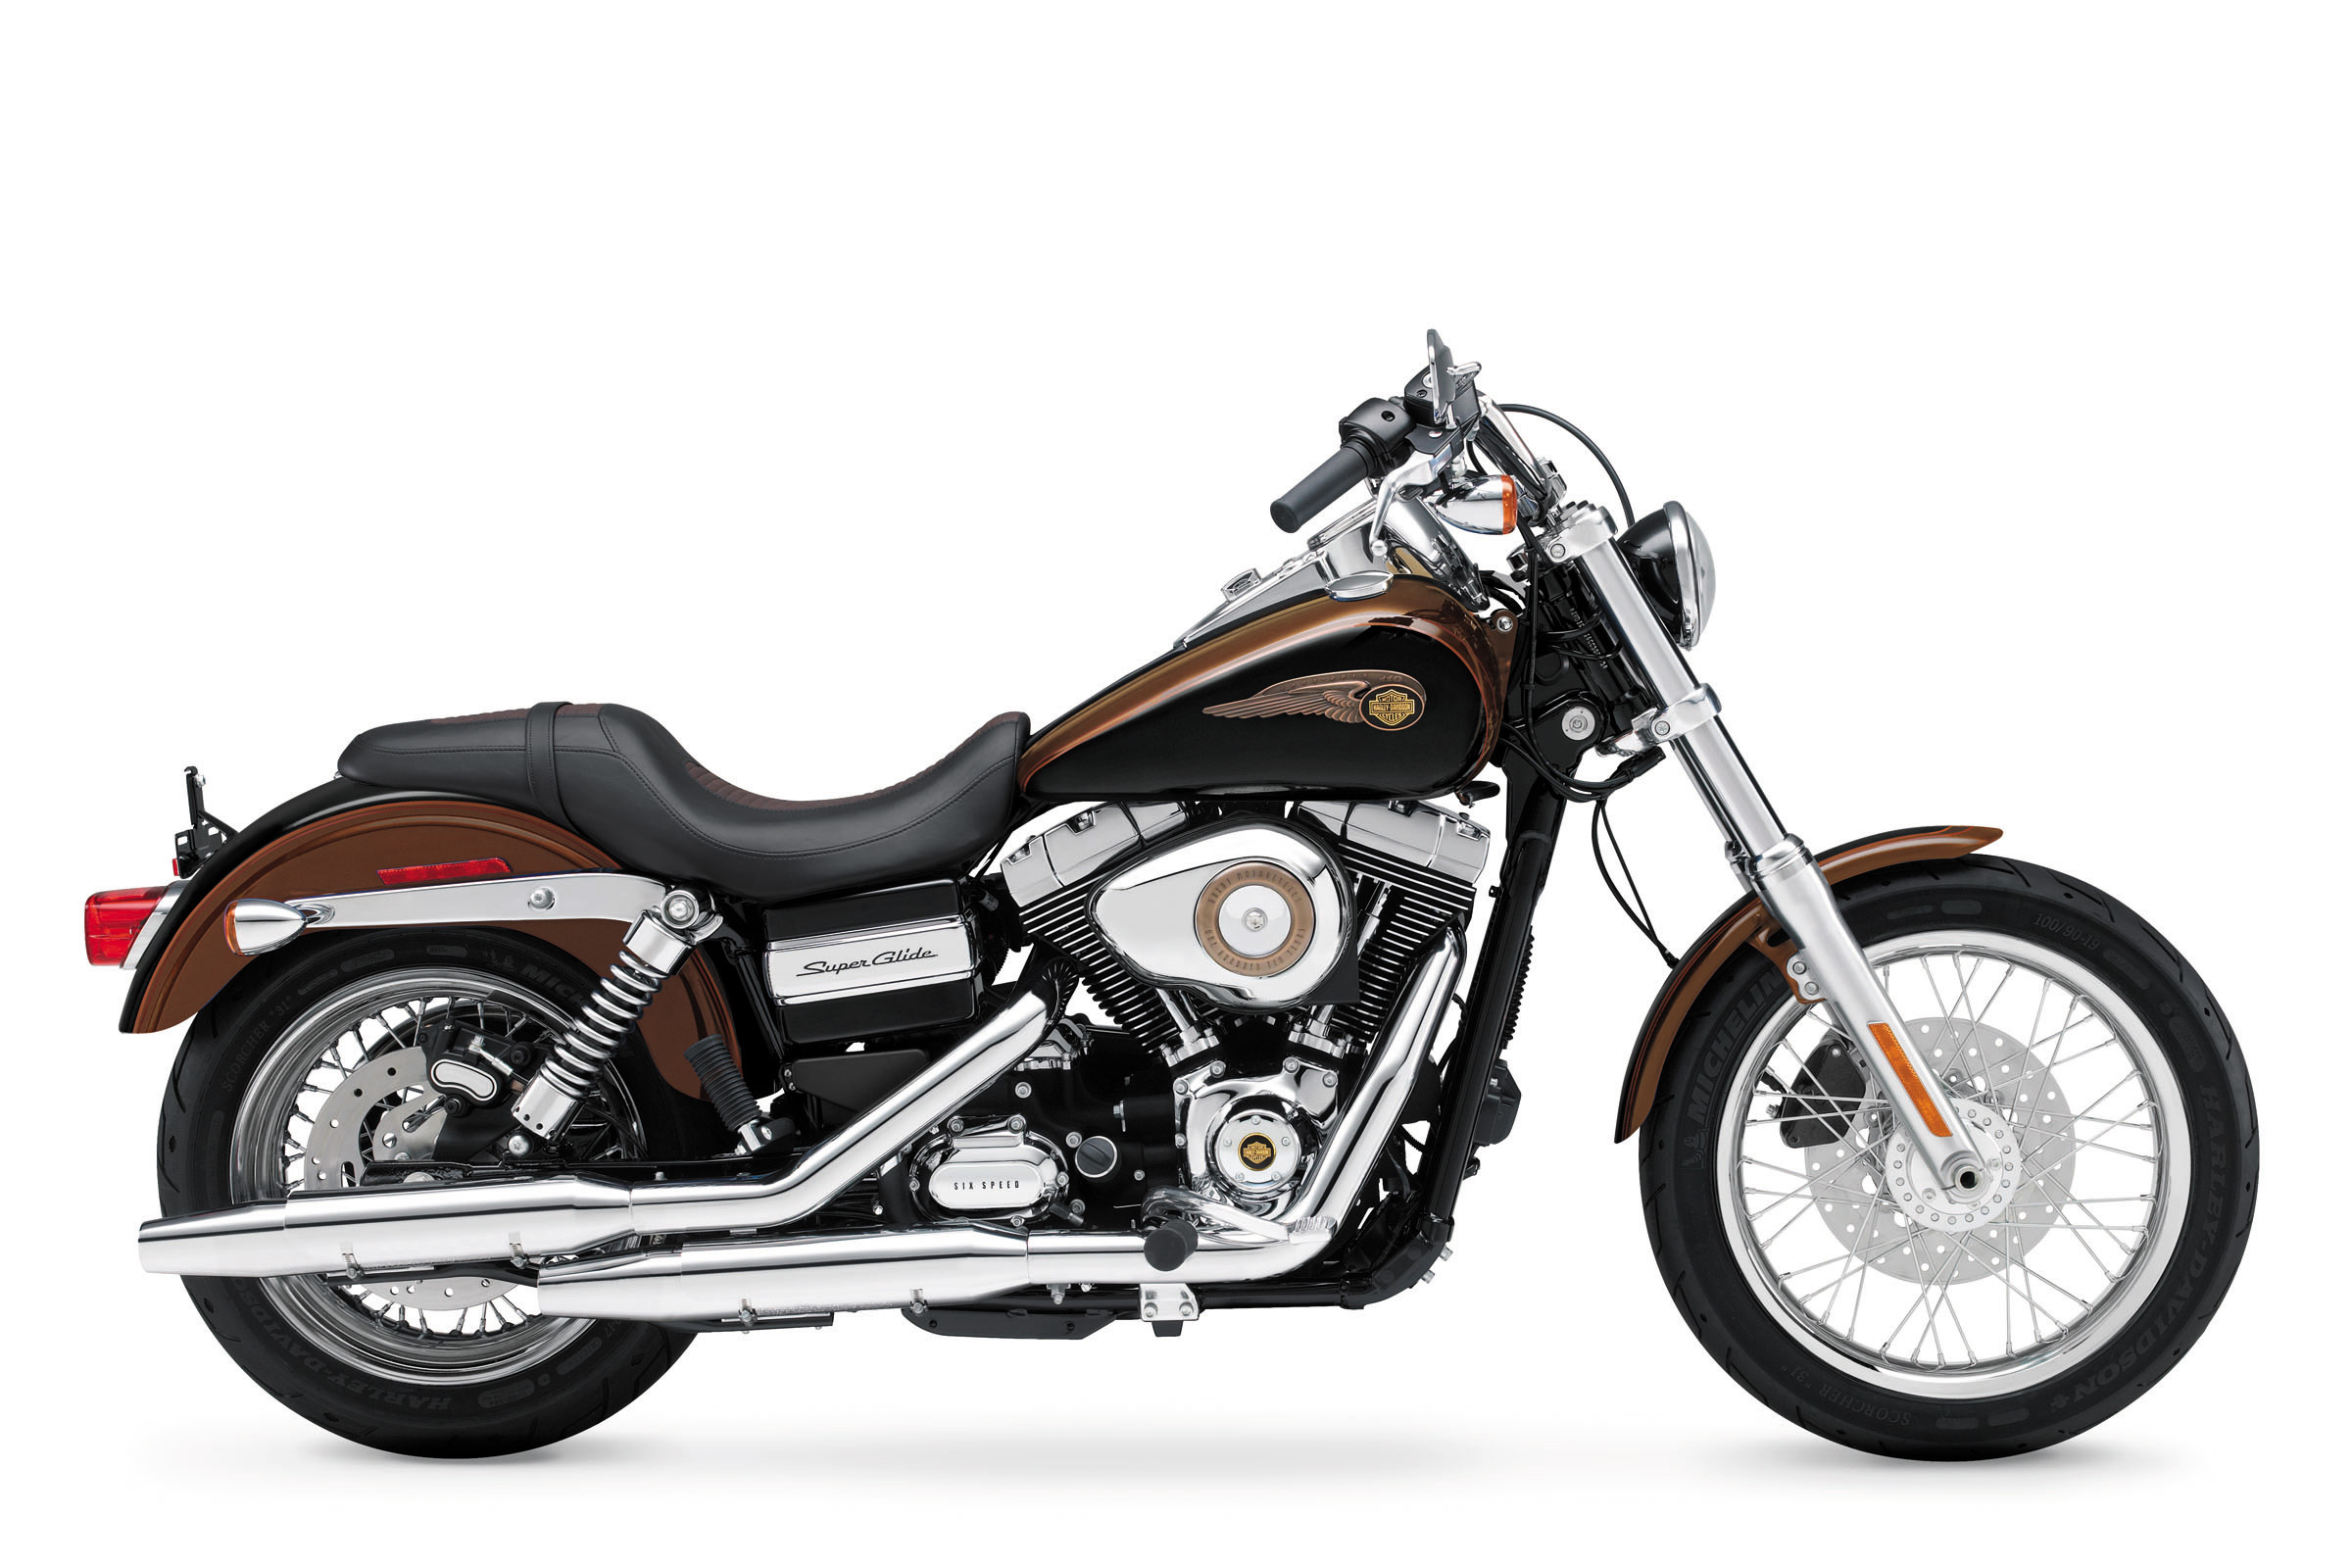 Harley-Davidson 2013 offerings include Hard Candy Custom styling 